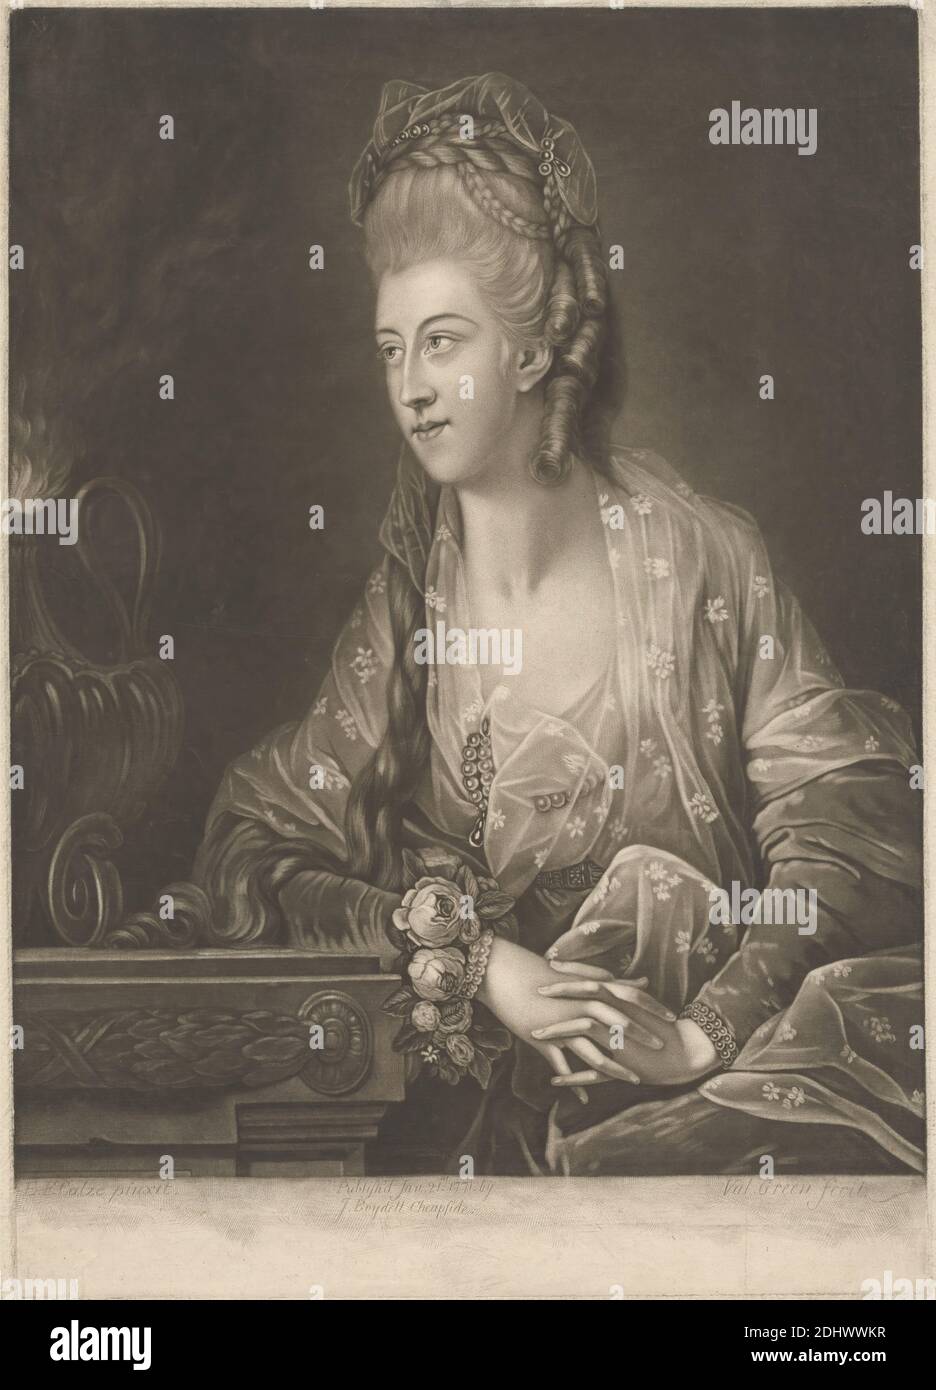 Mrs. Le Maistre, Print made by Valentine Green, 1739–1813, British, after Edward Francis Cunningham, ca. 1741–1795, British, Published by John Boydell, 1720–1804, British, 1771, Mezzotint on medium, moderately textured, cream laid paper, Sheet: 16 13/16 x 12 inches (42.7 x 30.5 cm), Plate: 16 1/16 x 11 3/8 inches (40.8 x 28.9 cm), and Image: 14 1/2 x 11 3/8 inches (36.9 x 28.9 cm), bracelets, braids, corsage, costume, curls, flowers (plants), gown, jewelry, long hair, nobility, pearls, portrait, roses (plant), table, woman Stock Photo